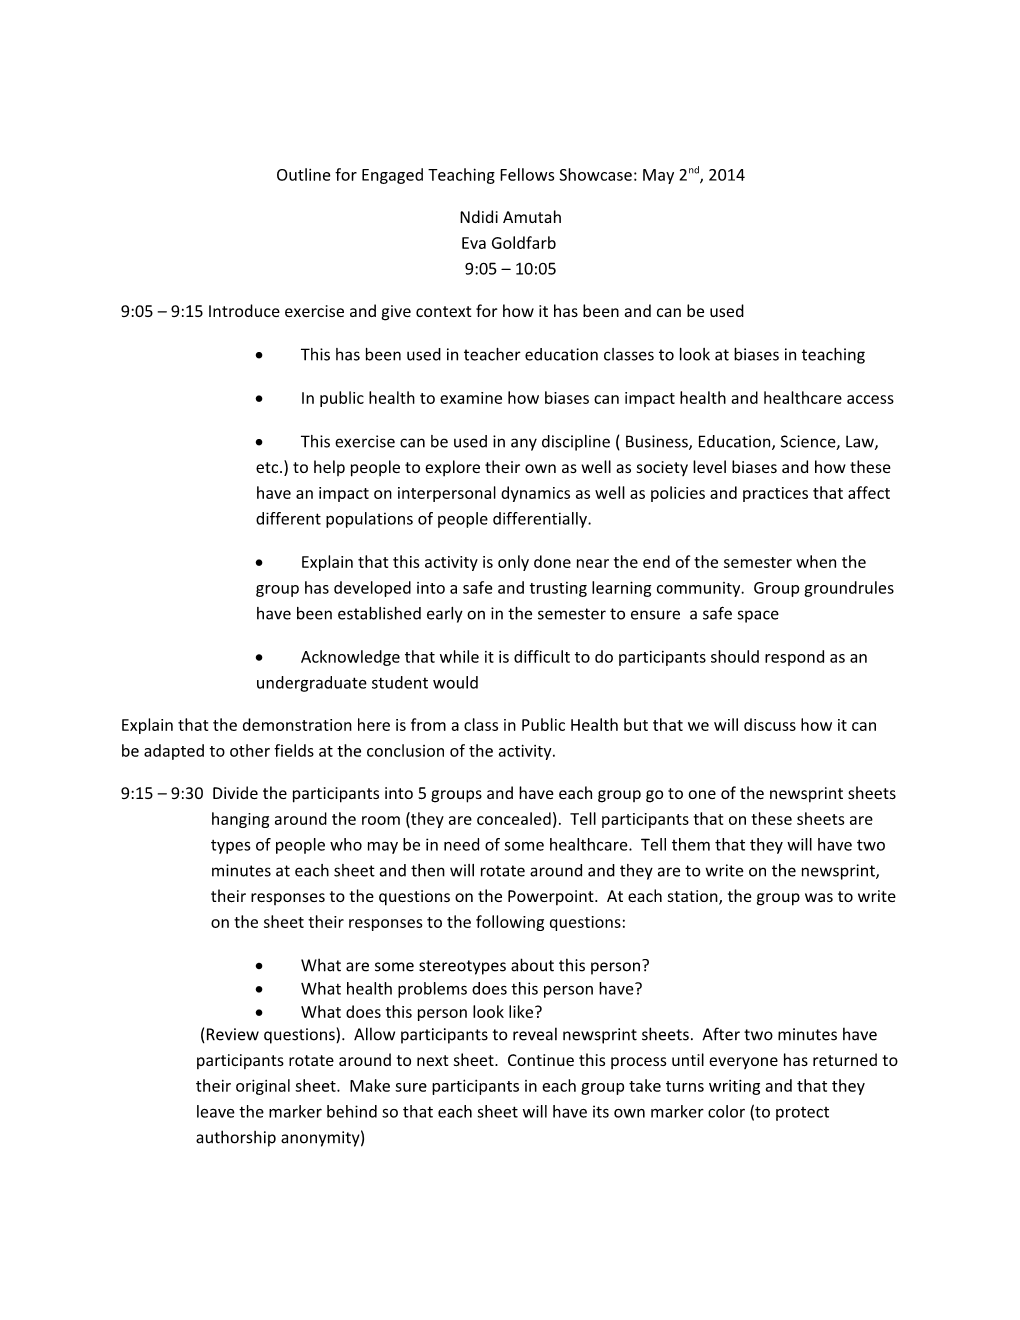 Outline for Engaged Teaching Fellows Showcase: May 2Nd, 2014